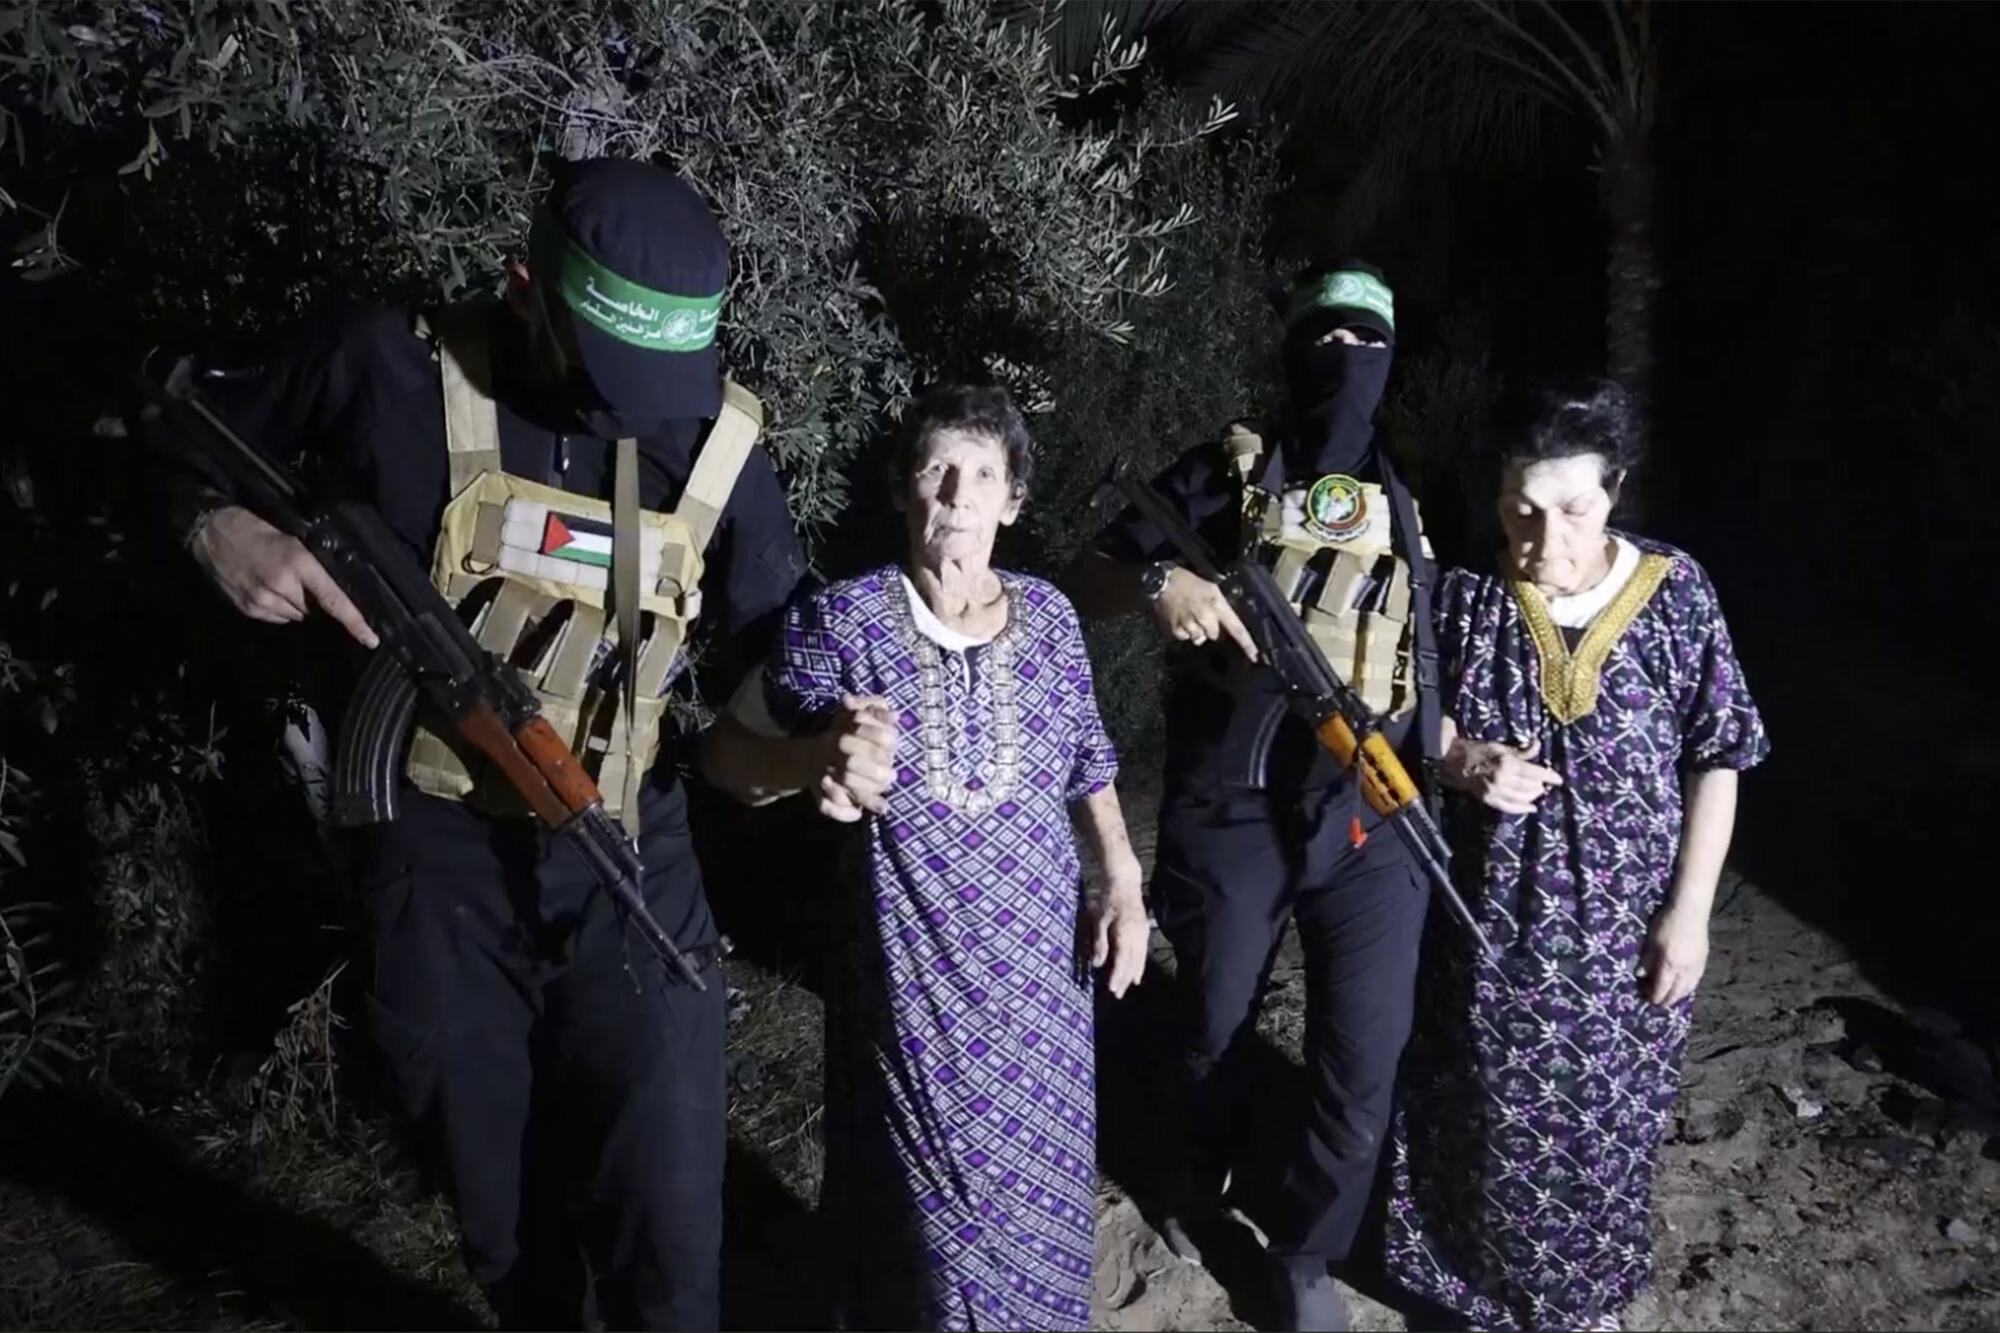 Two masked gunmen in black next to two women in long, printed dresses.